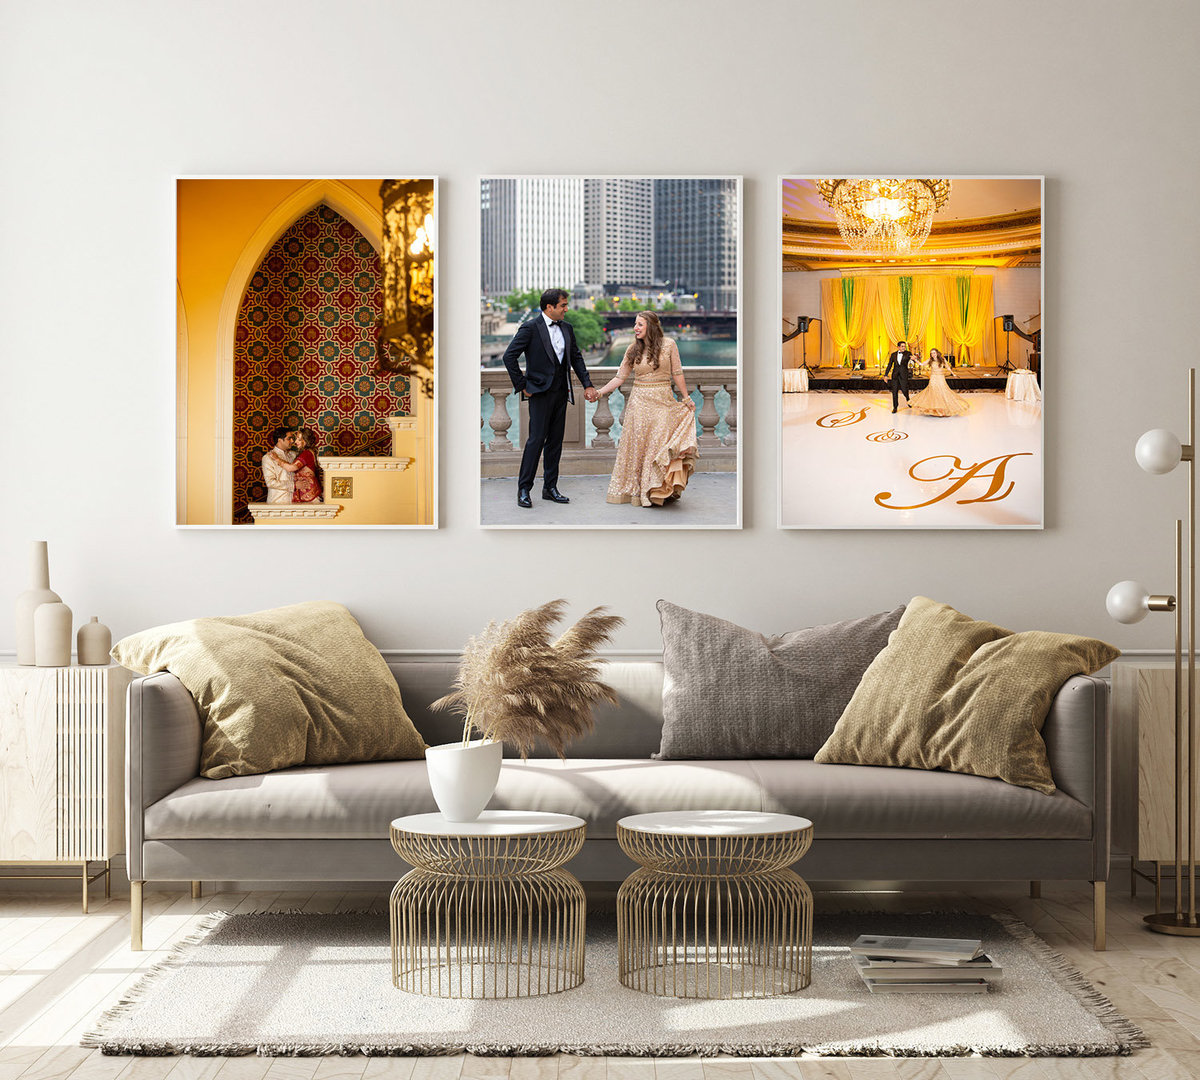 3 image composite on the wall of a bright living room.